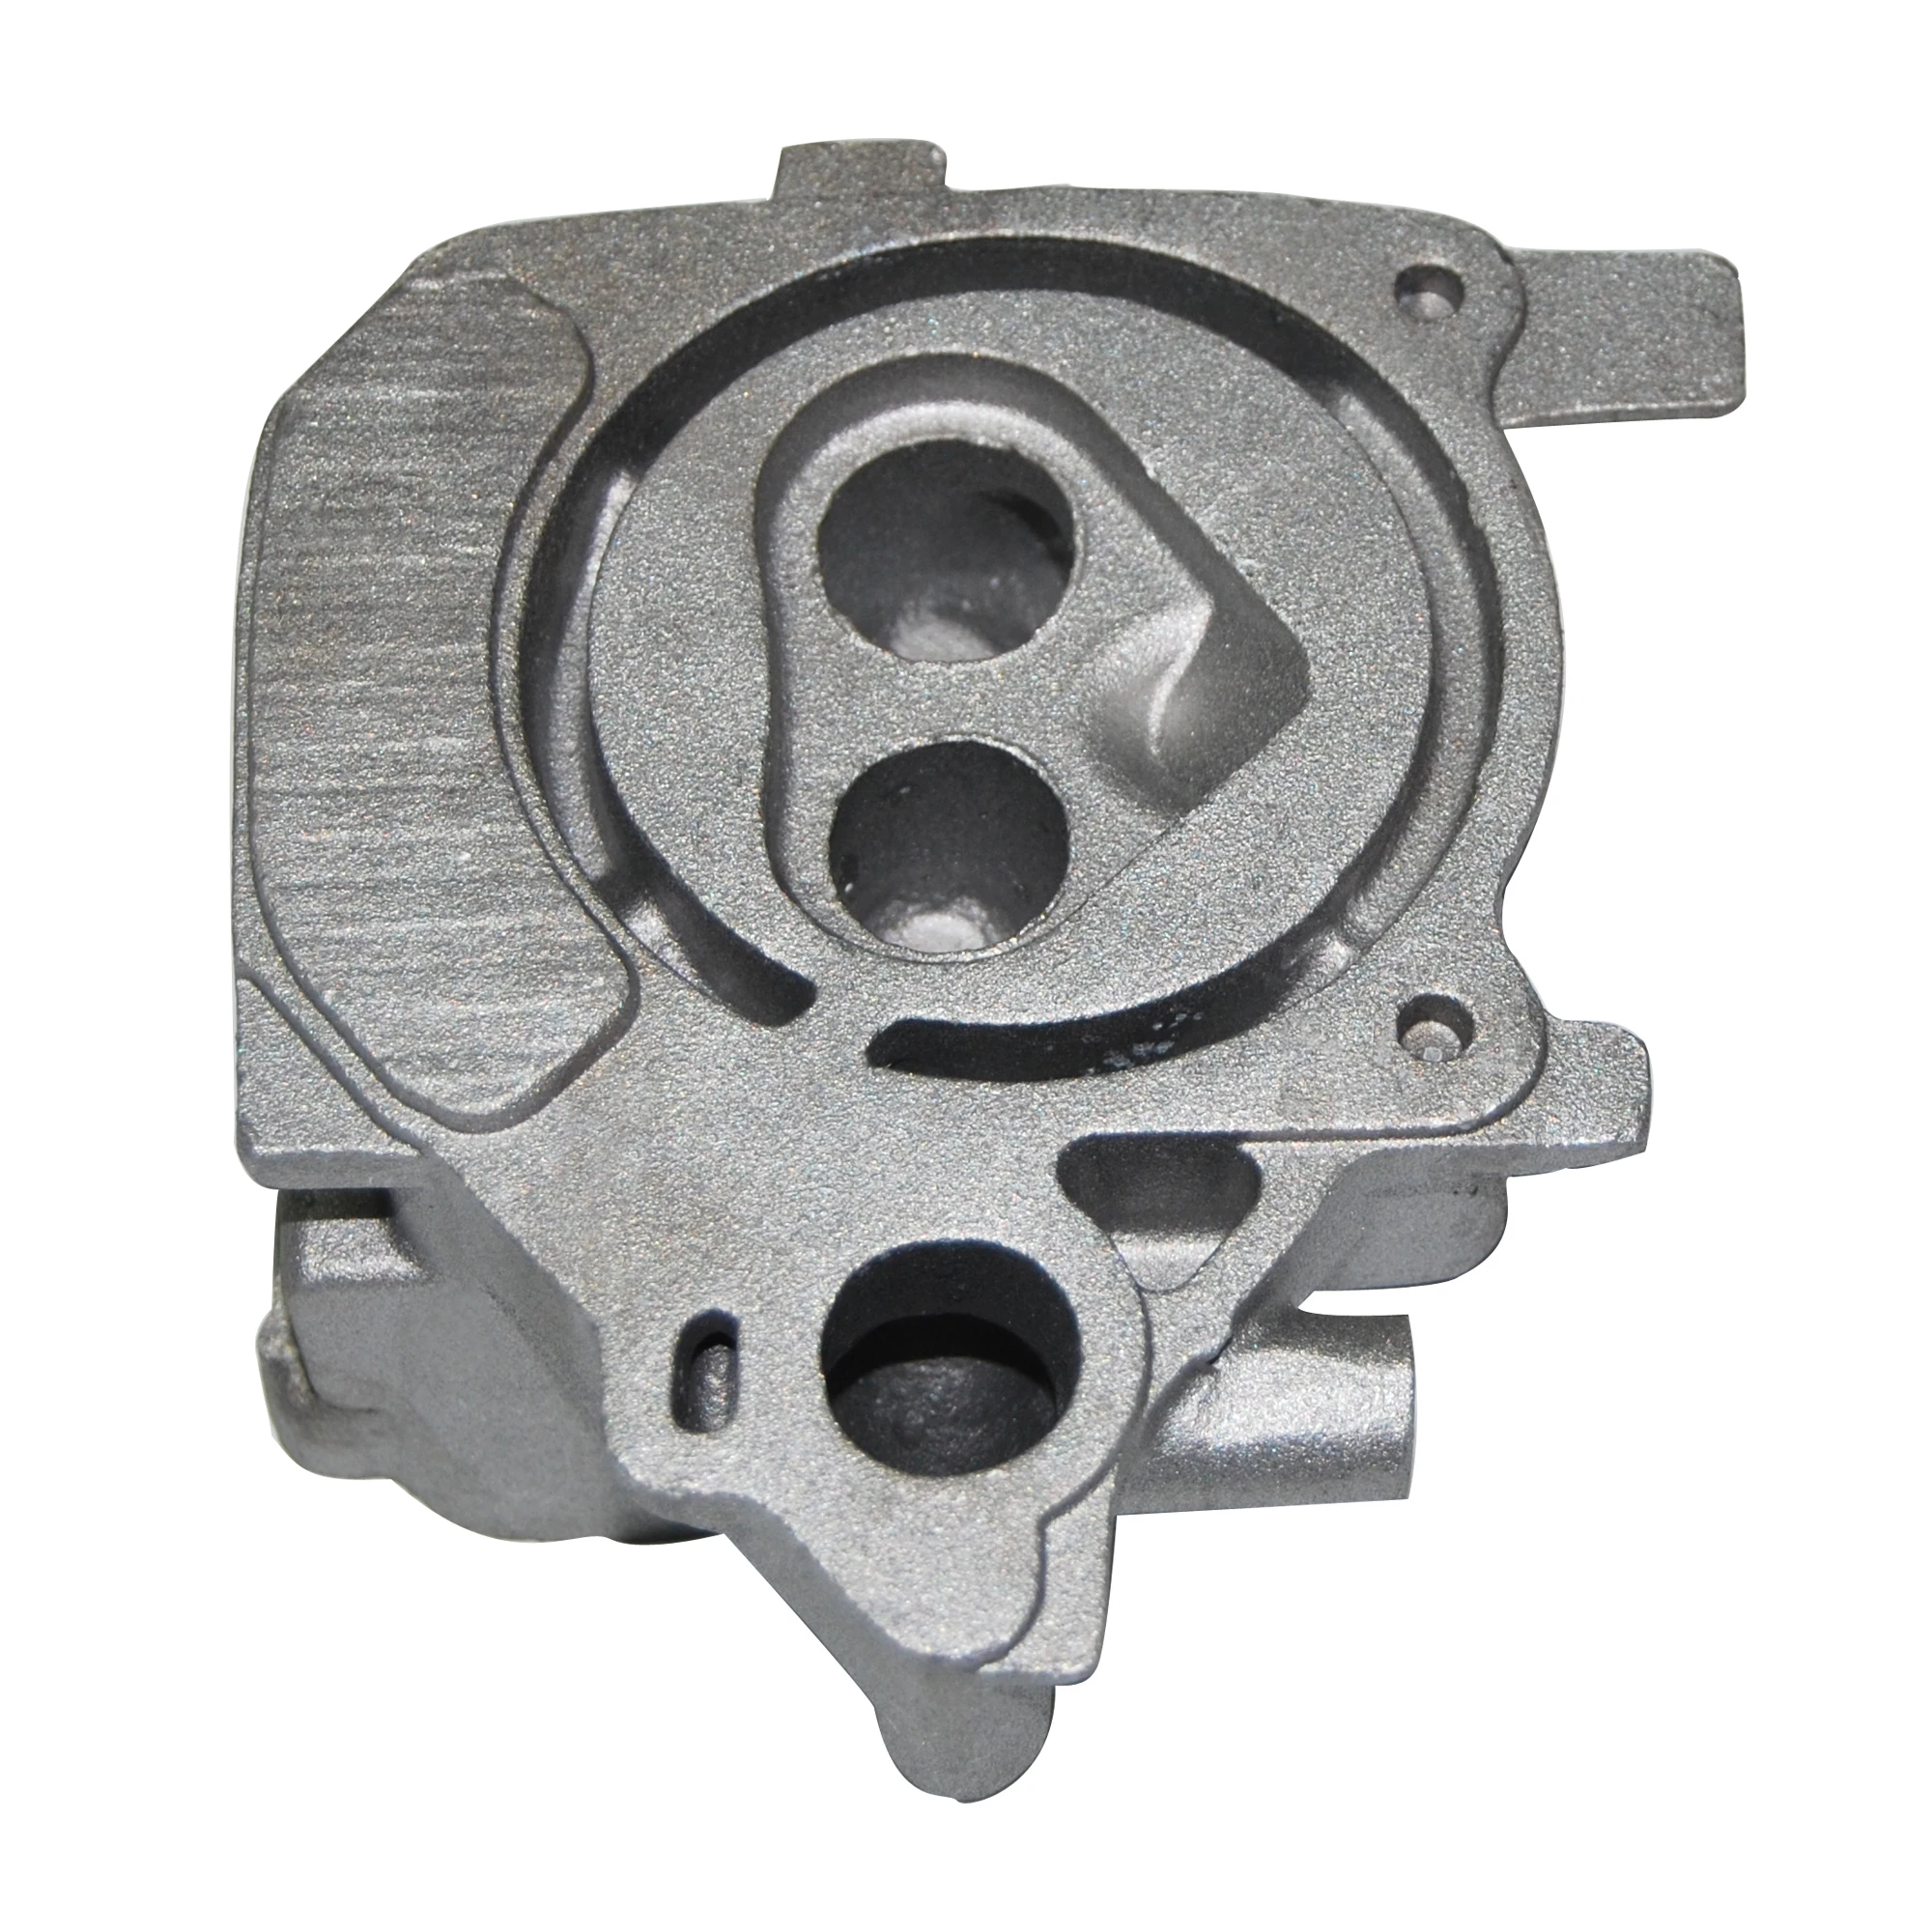 MATECH Customized Low Pressure Casting Water Pump Parts(图15)